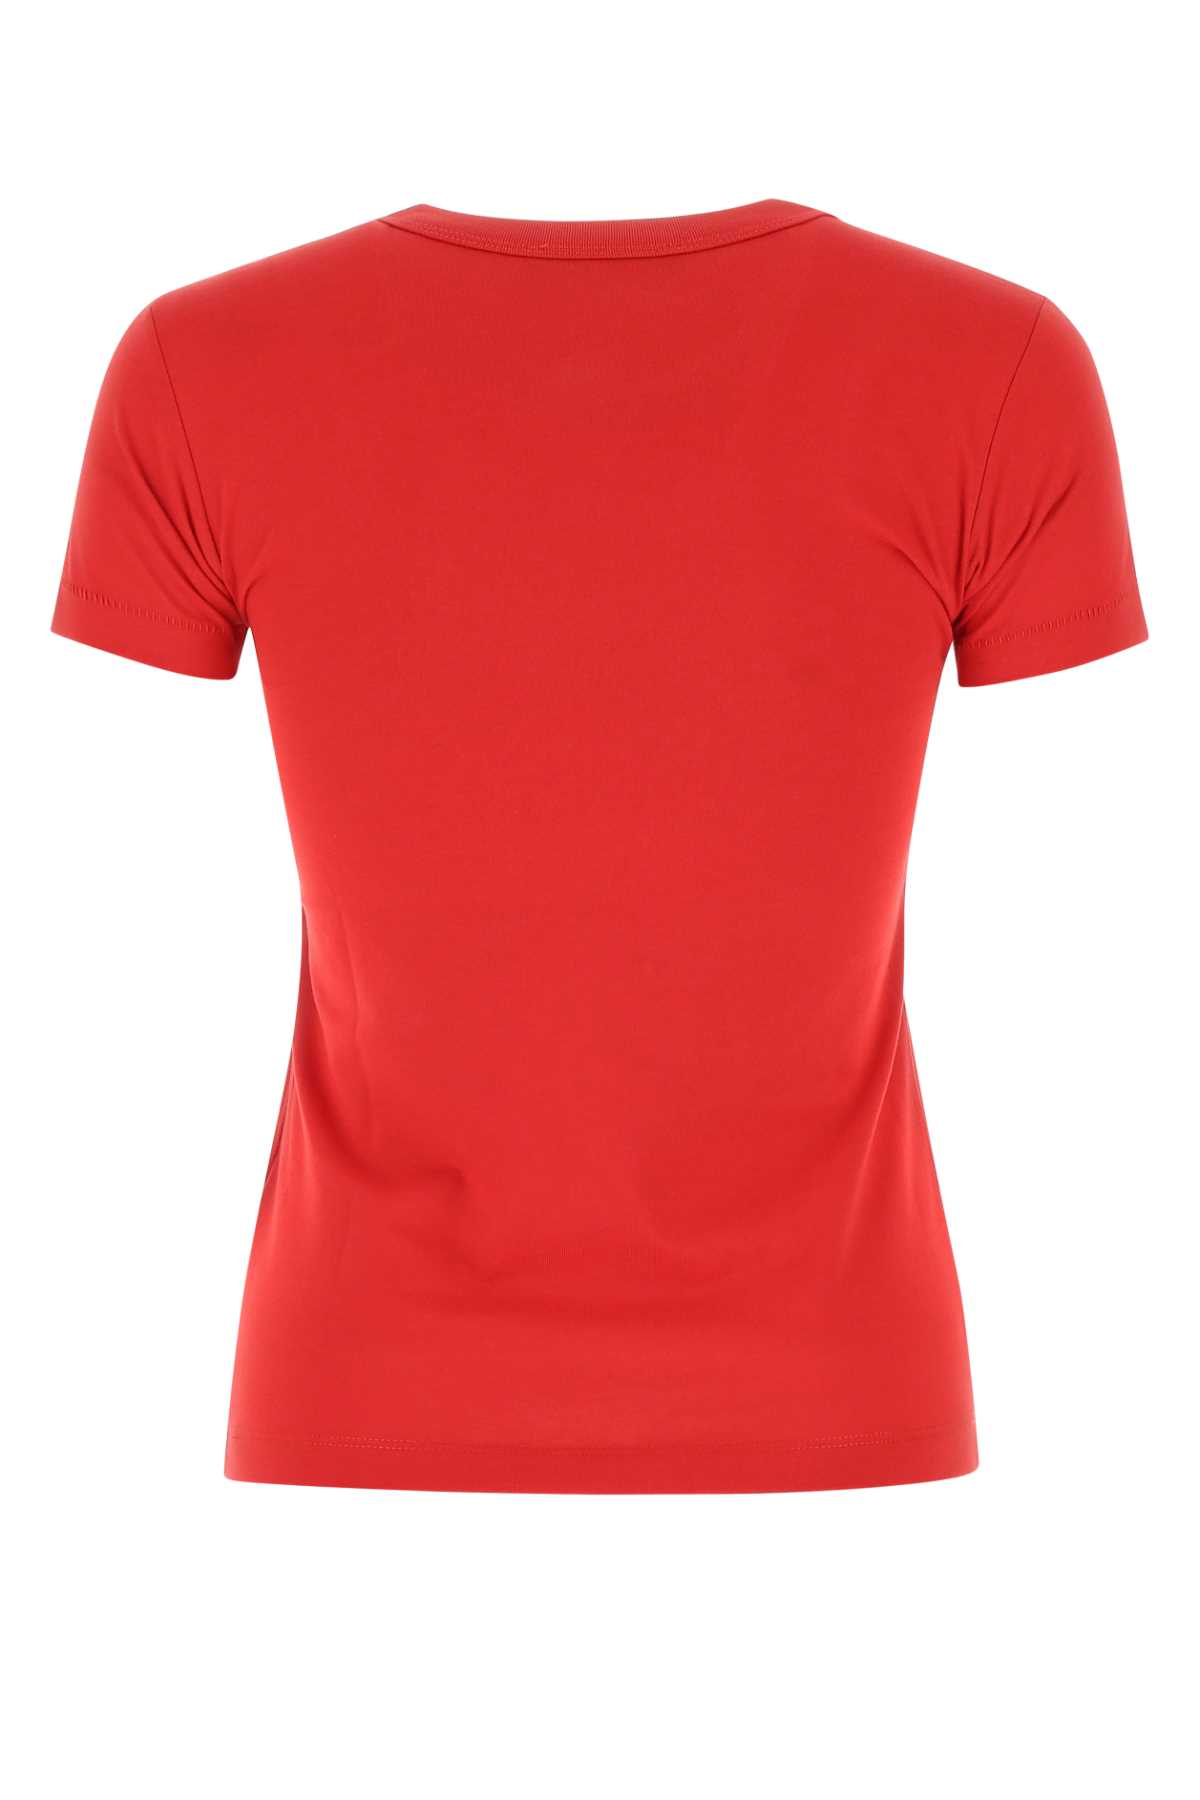 Raf Simons Red Cotton T-shirt In 0030